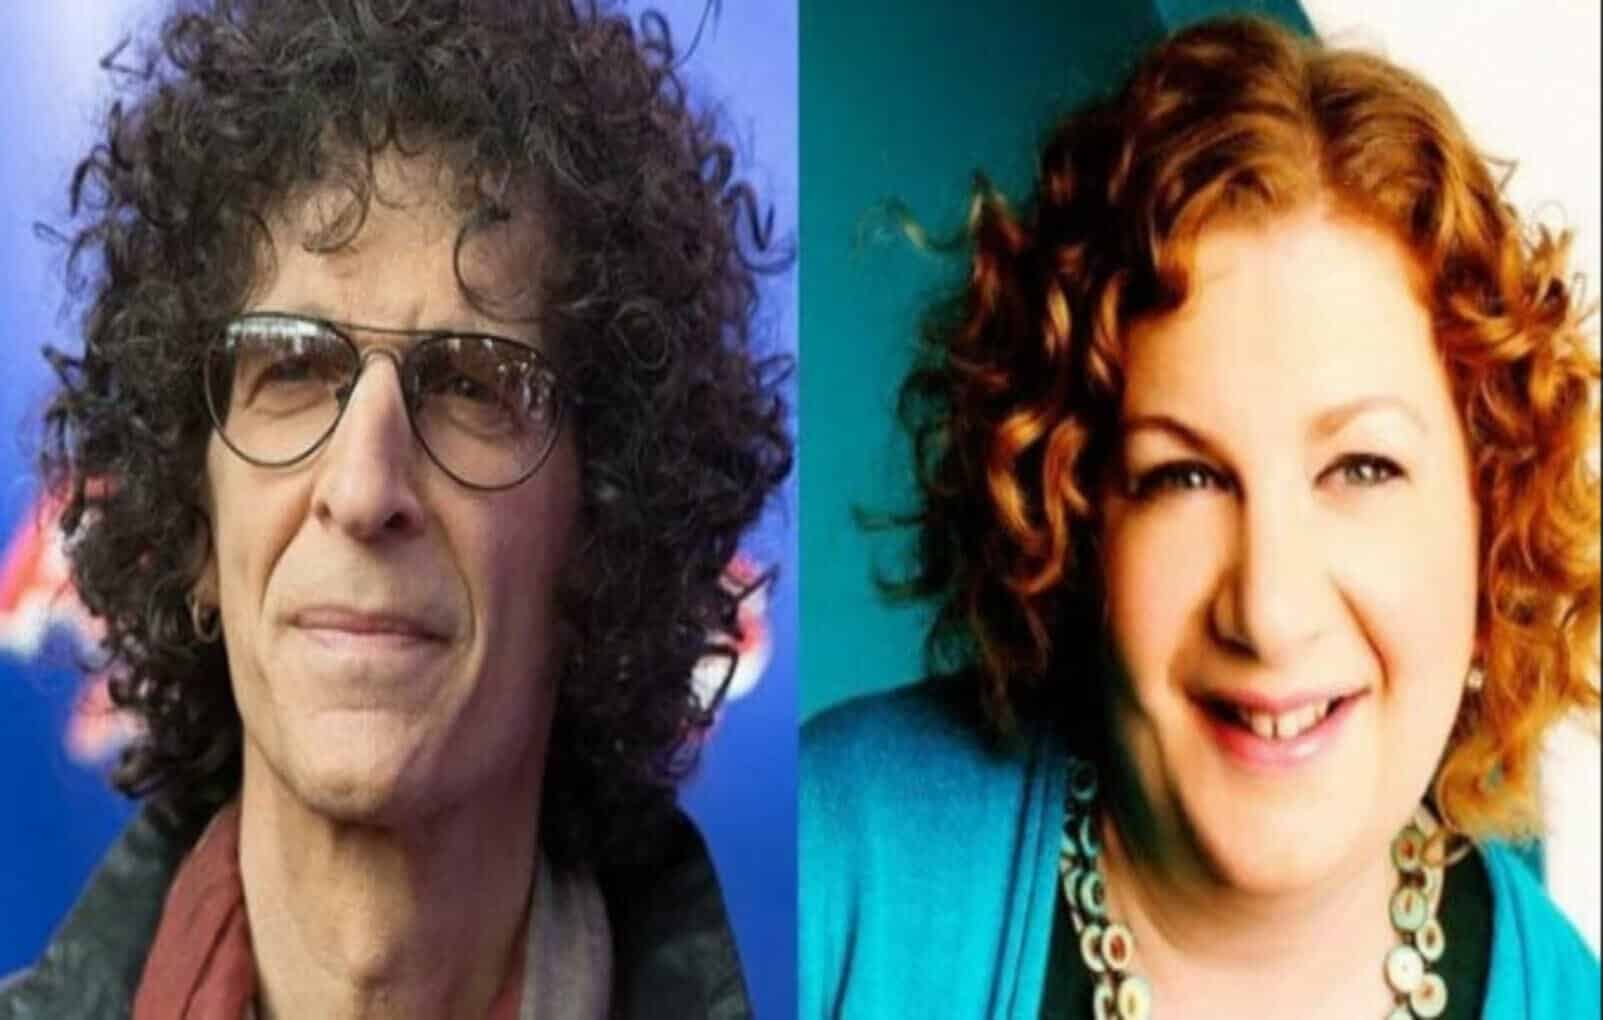 Who is Alison Berns? Age, biography and facts about Howard Stern’s ex